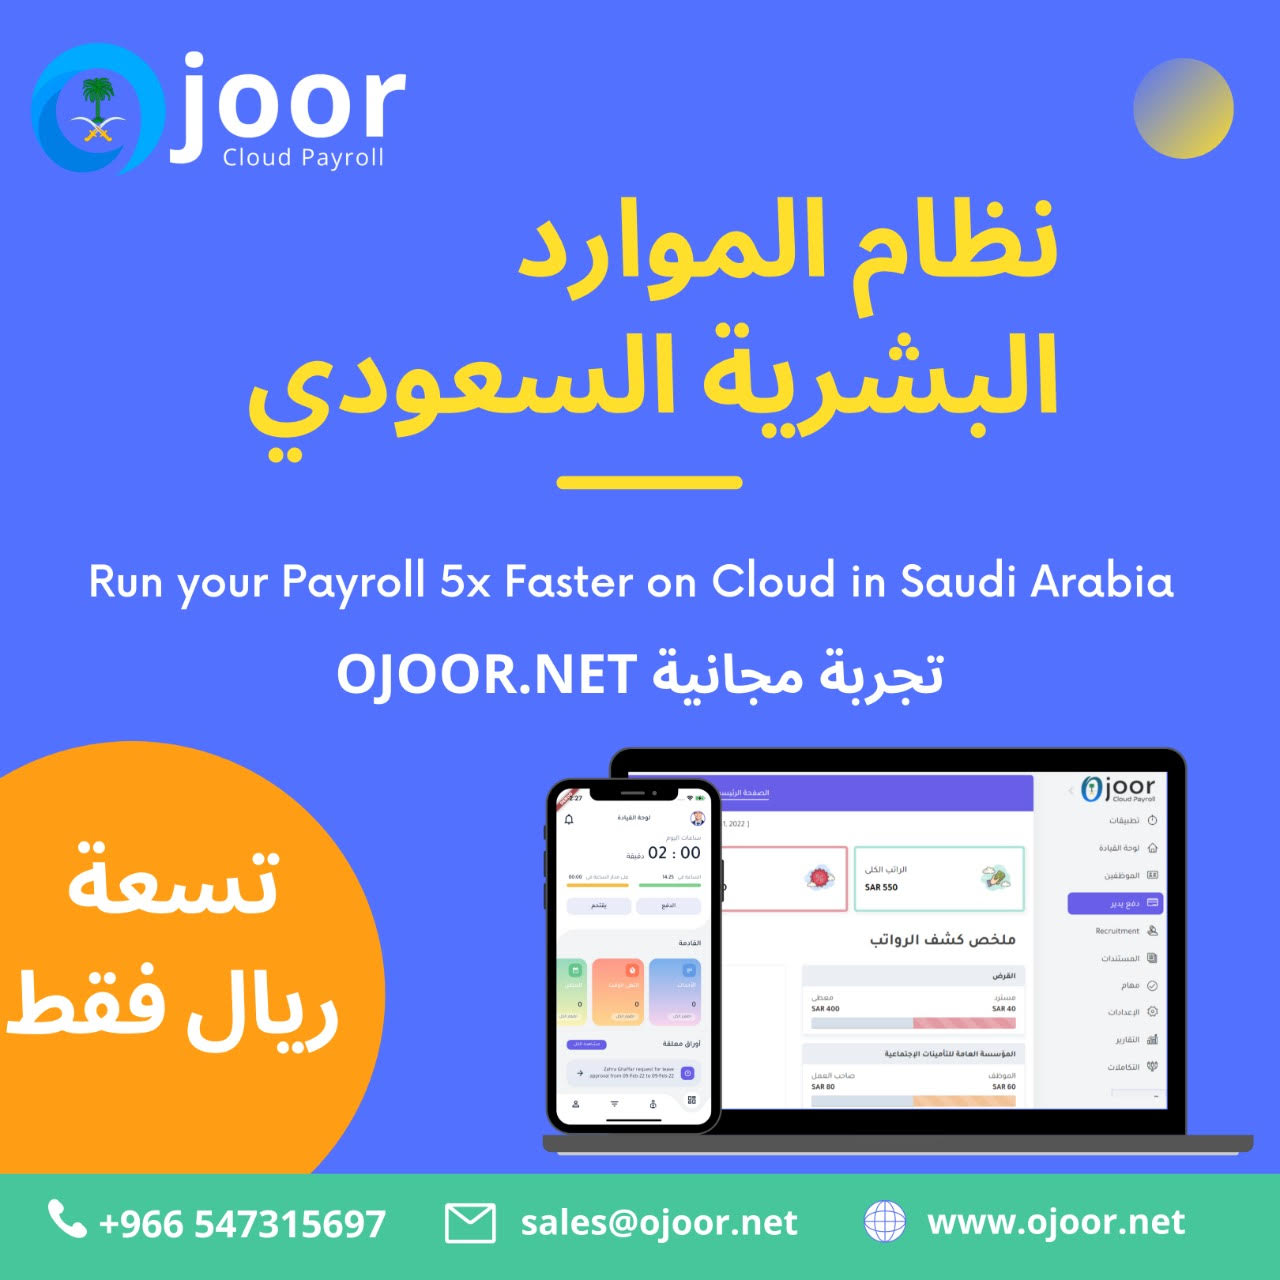 How to improve your experience with Payroll System in Saudi?